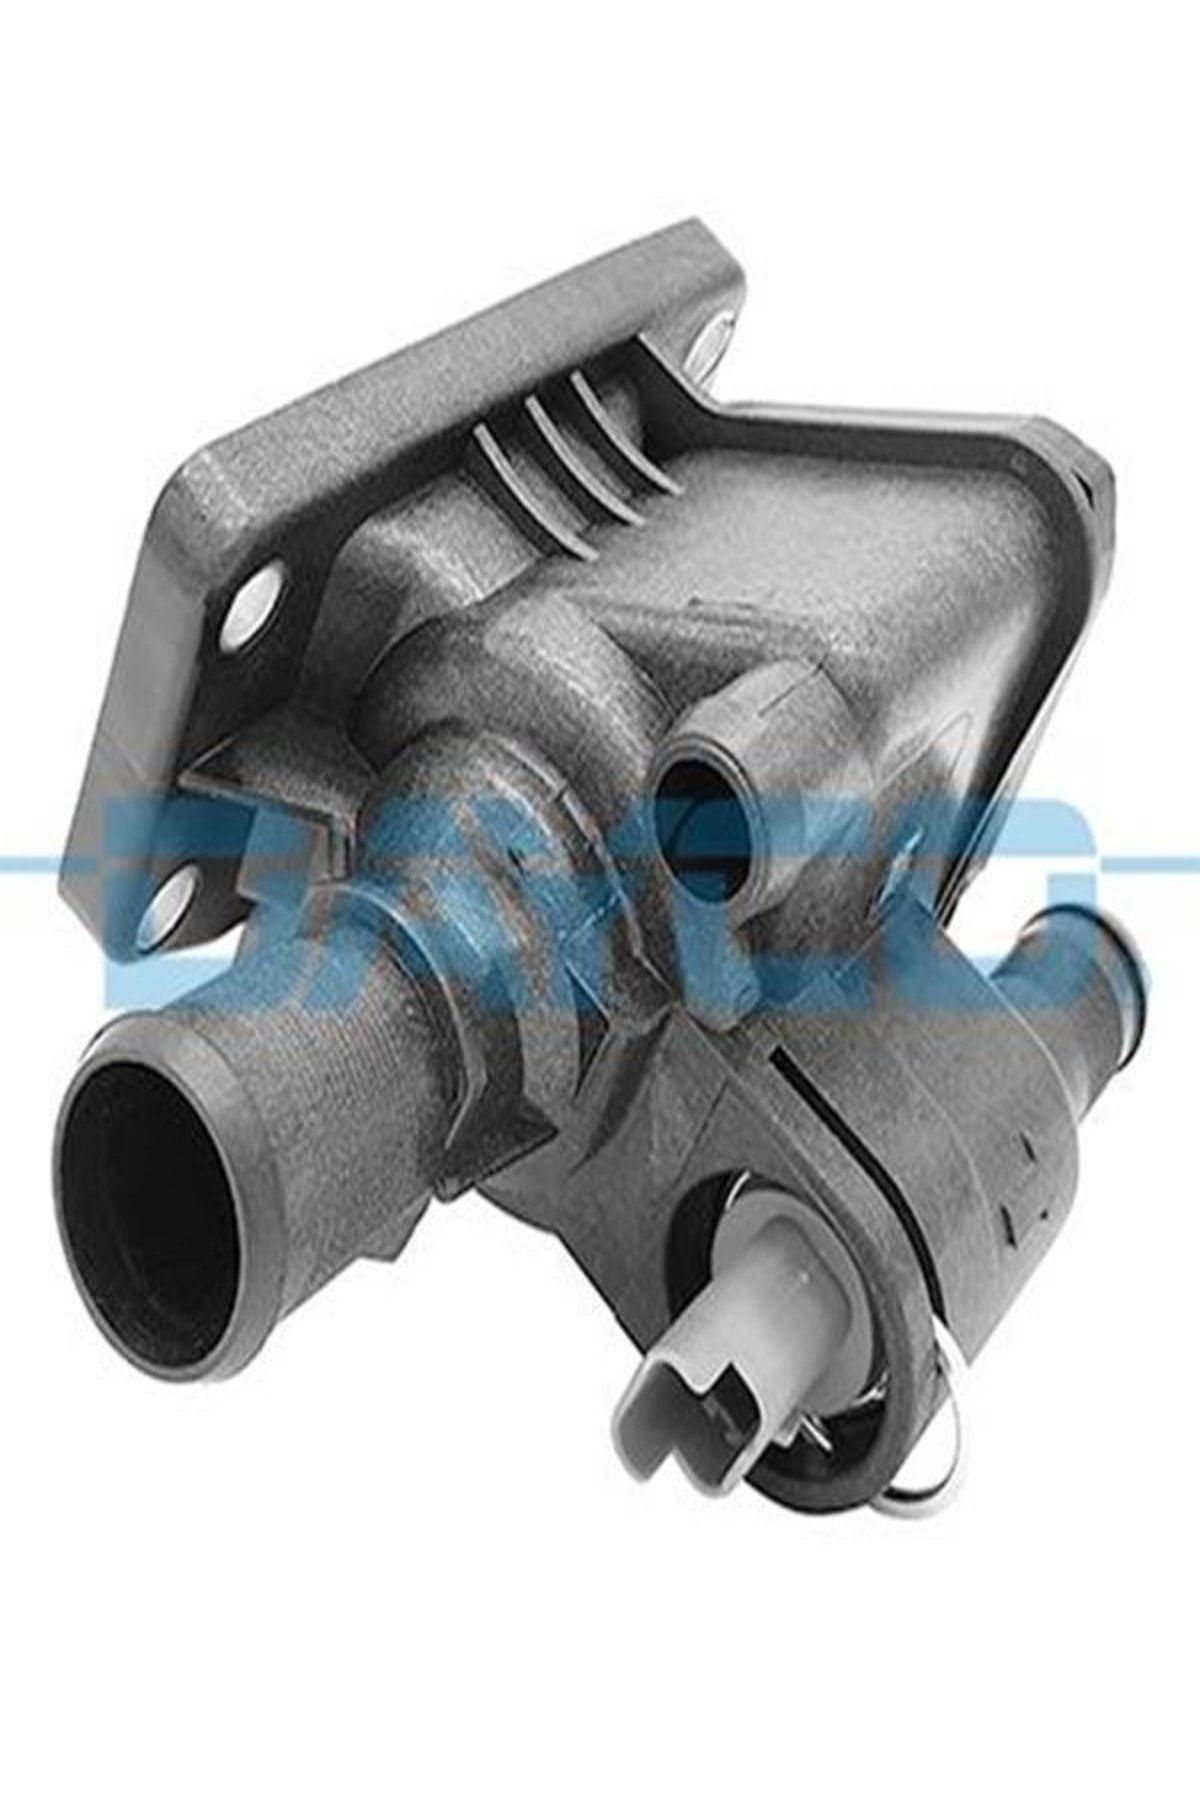 DAYCO Dt1102h Termostat Govde ( Ford : Fiesta 1.4tdci 02- )( Peugeot : 107 - 206 2s6q8a586ad (wa894337)